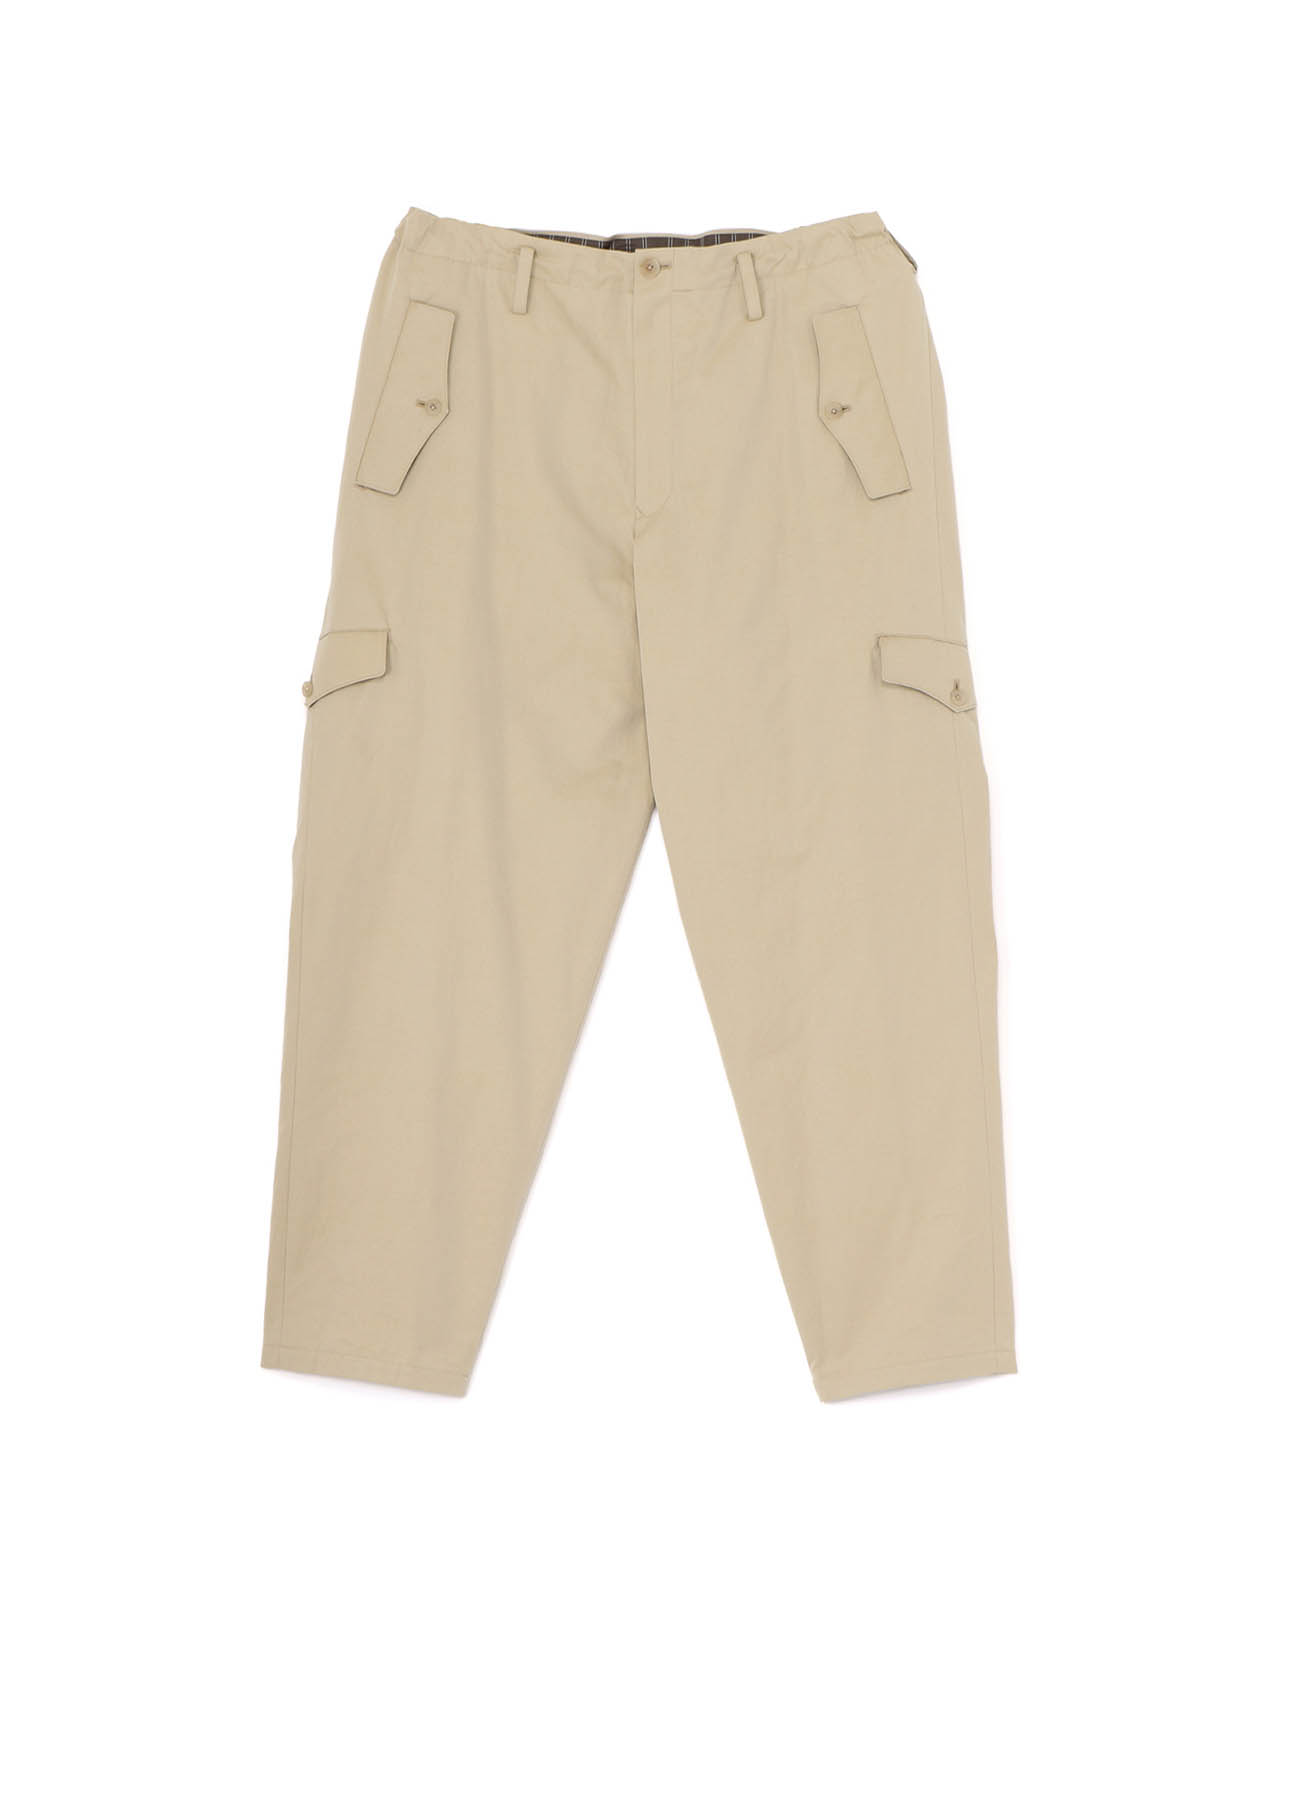 COTTON BURBERRY PANTS WITH FLAP POCKET